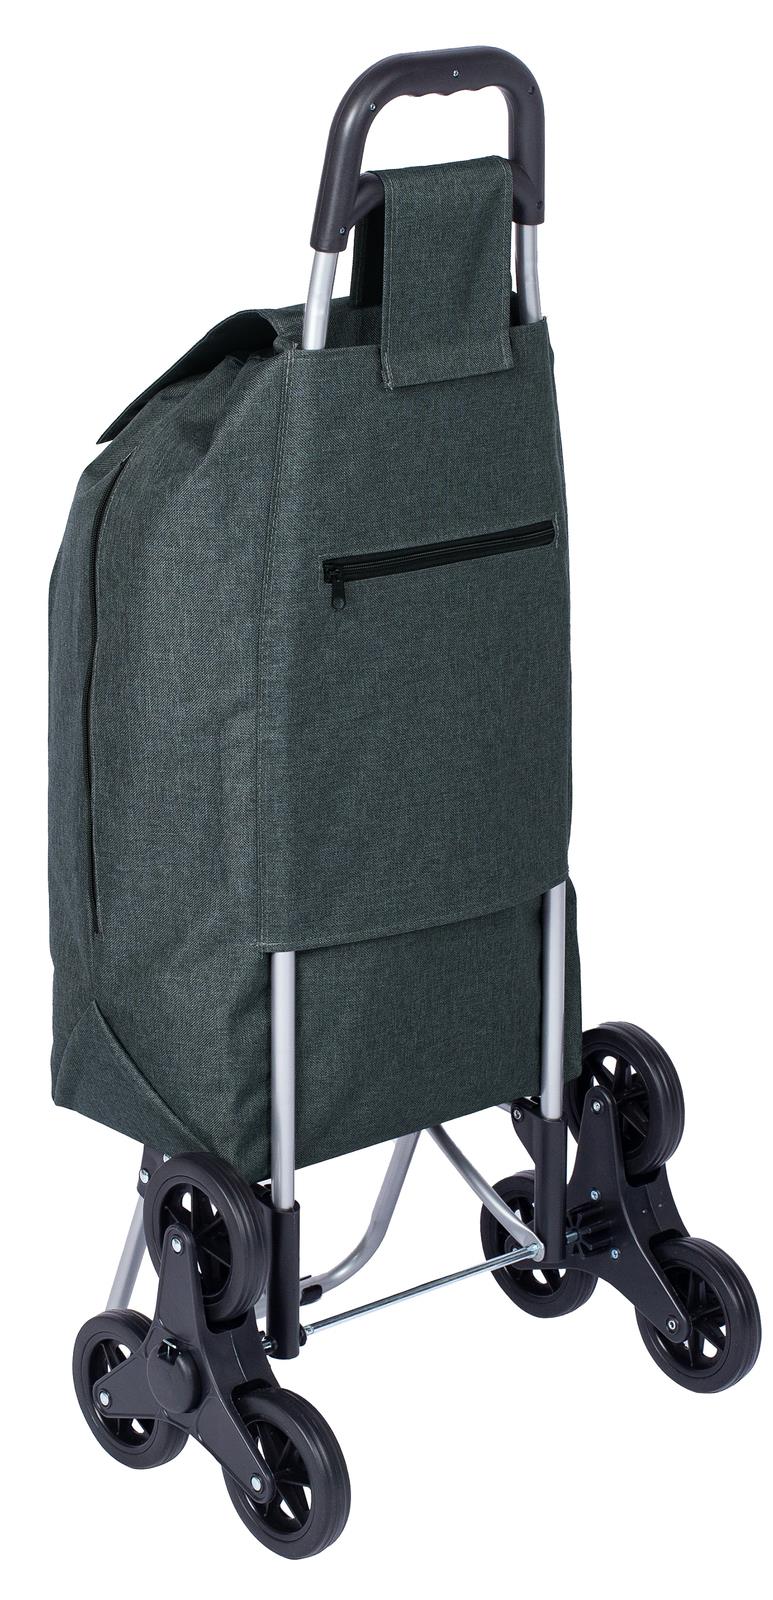 Sachi: Summit: Stair Climber Shopping Trolley (Charcoal grey) - D.Line